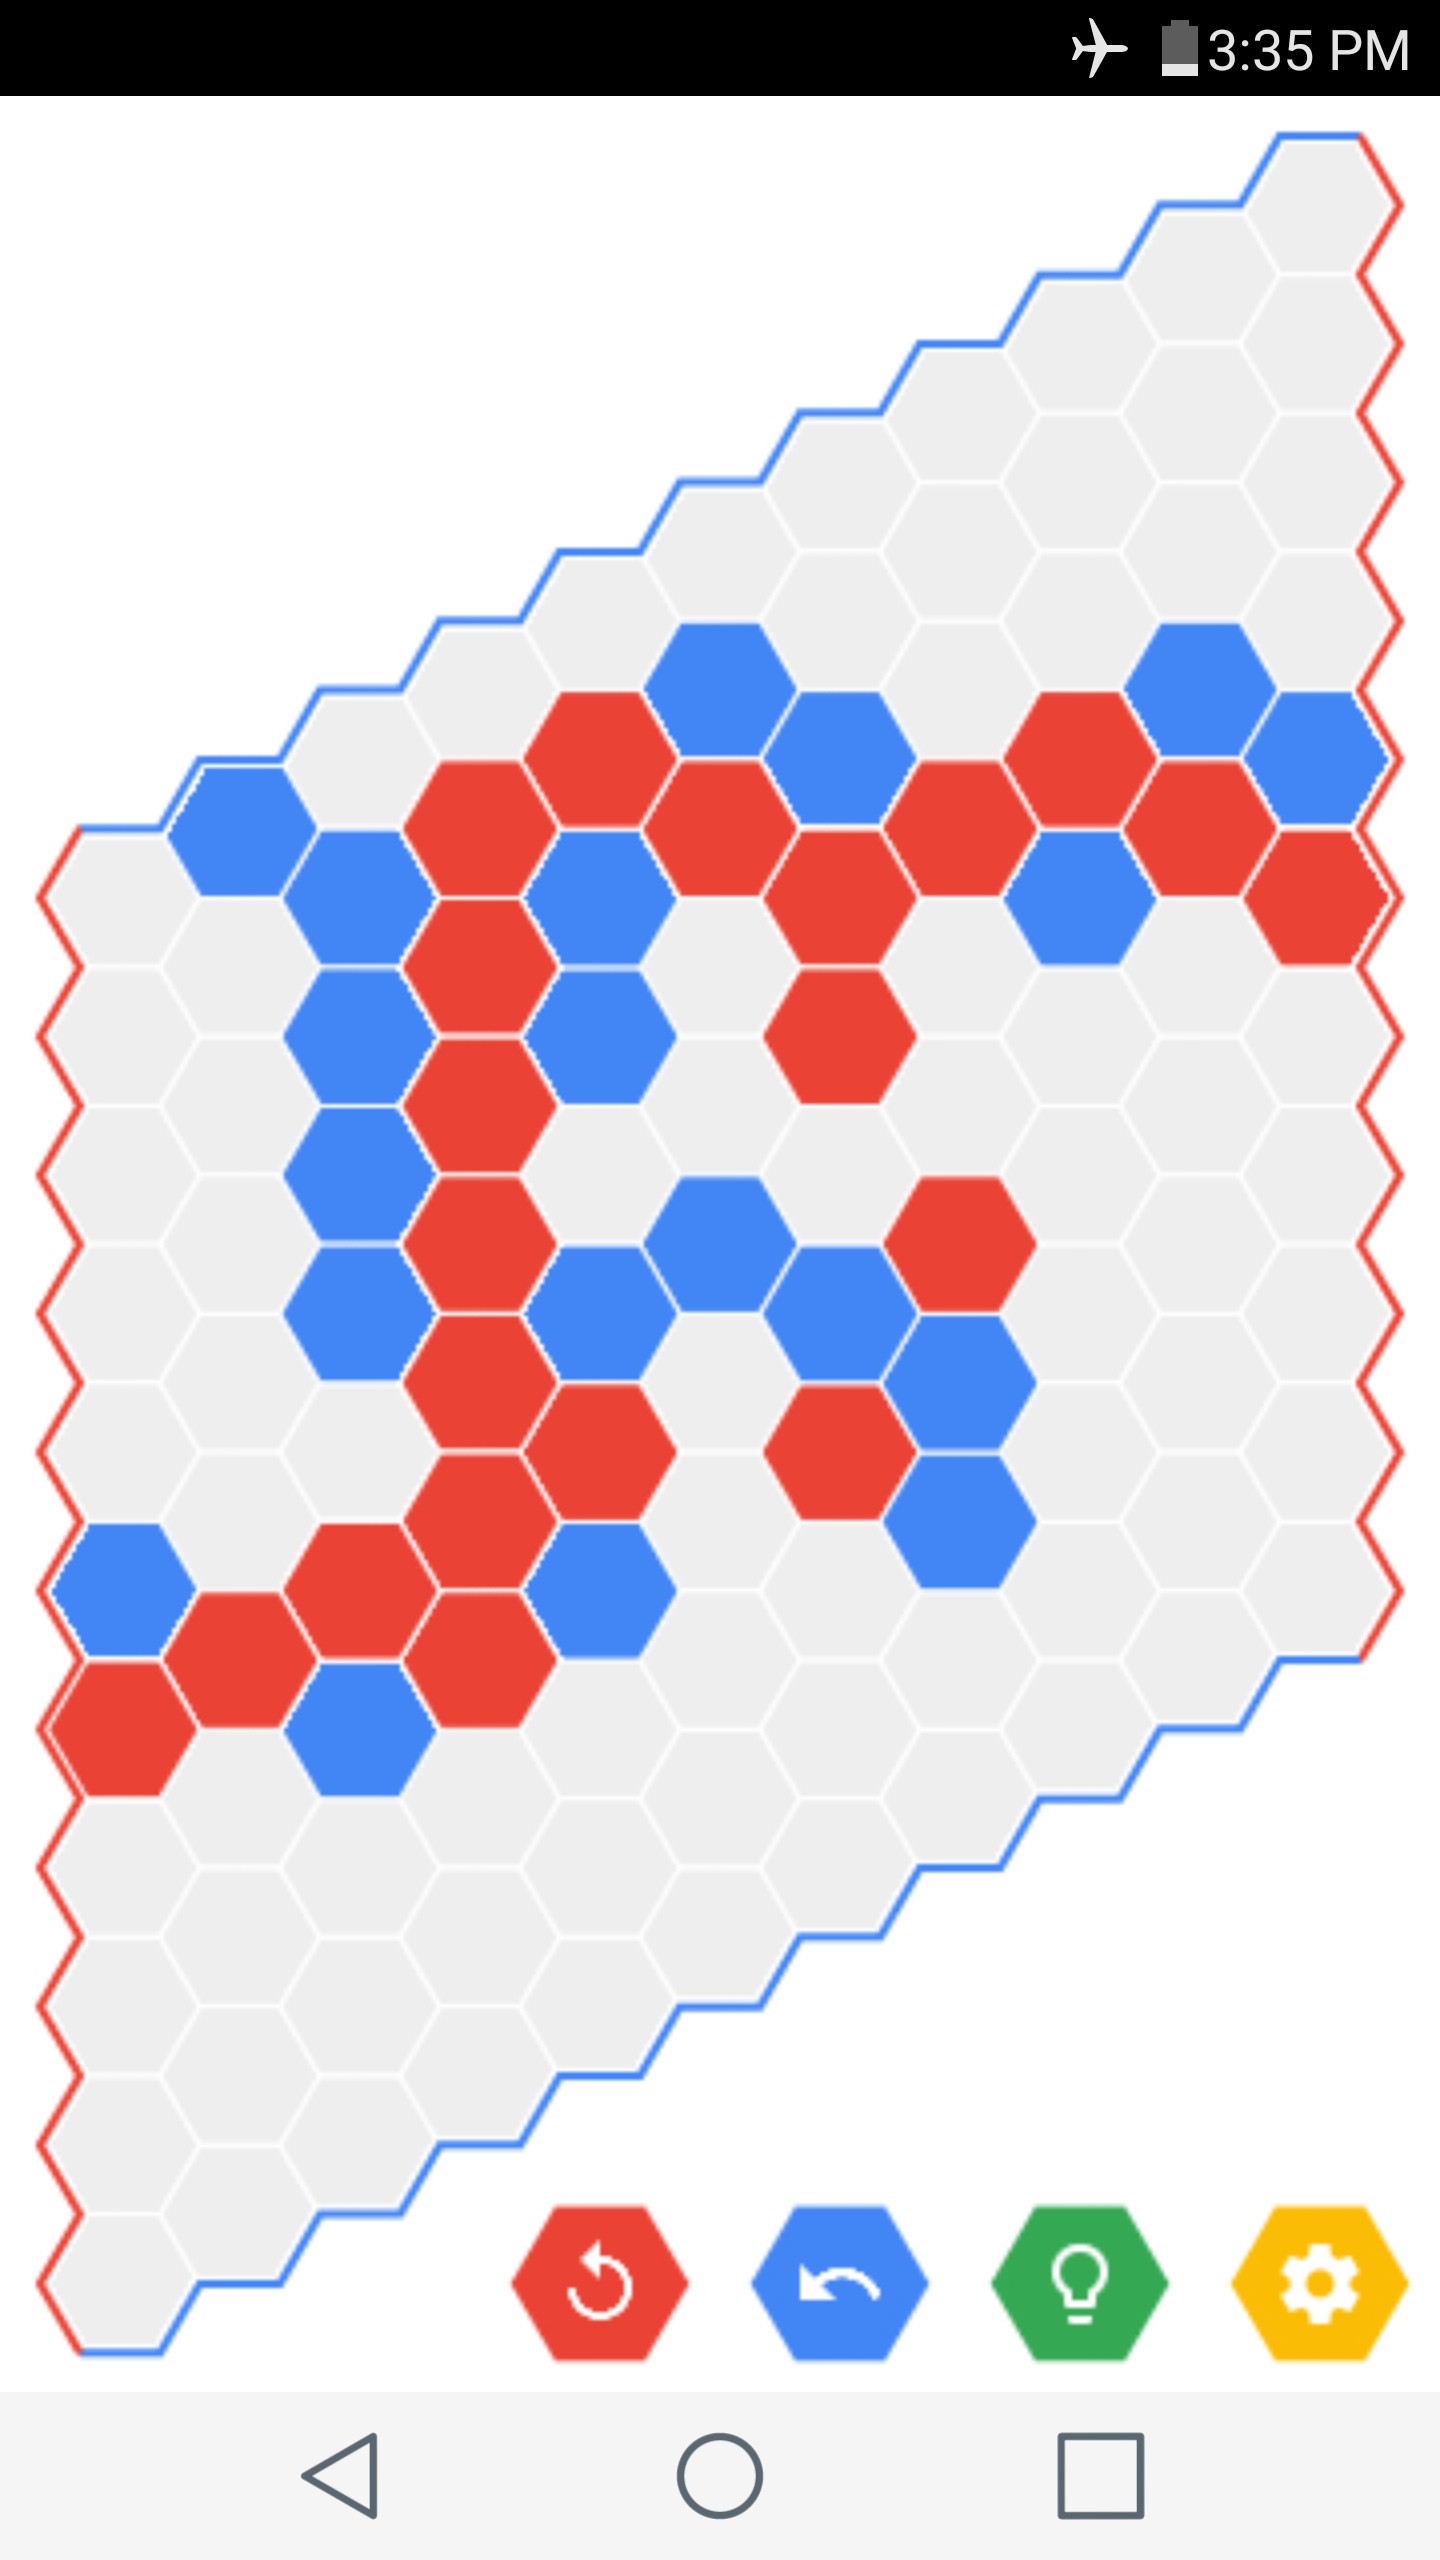 Hex: A Game About Connecting